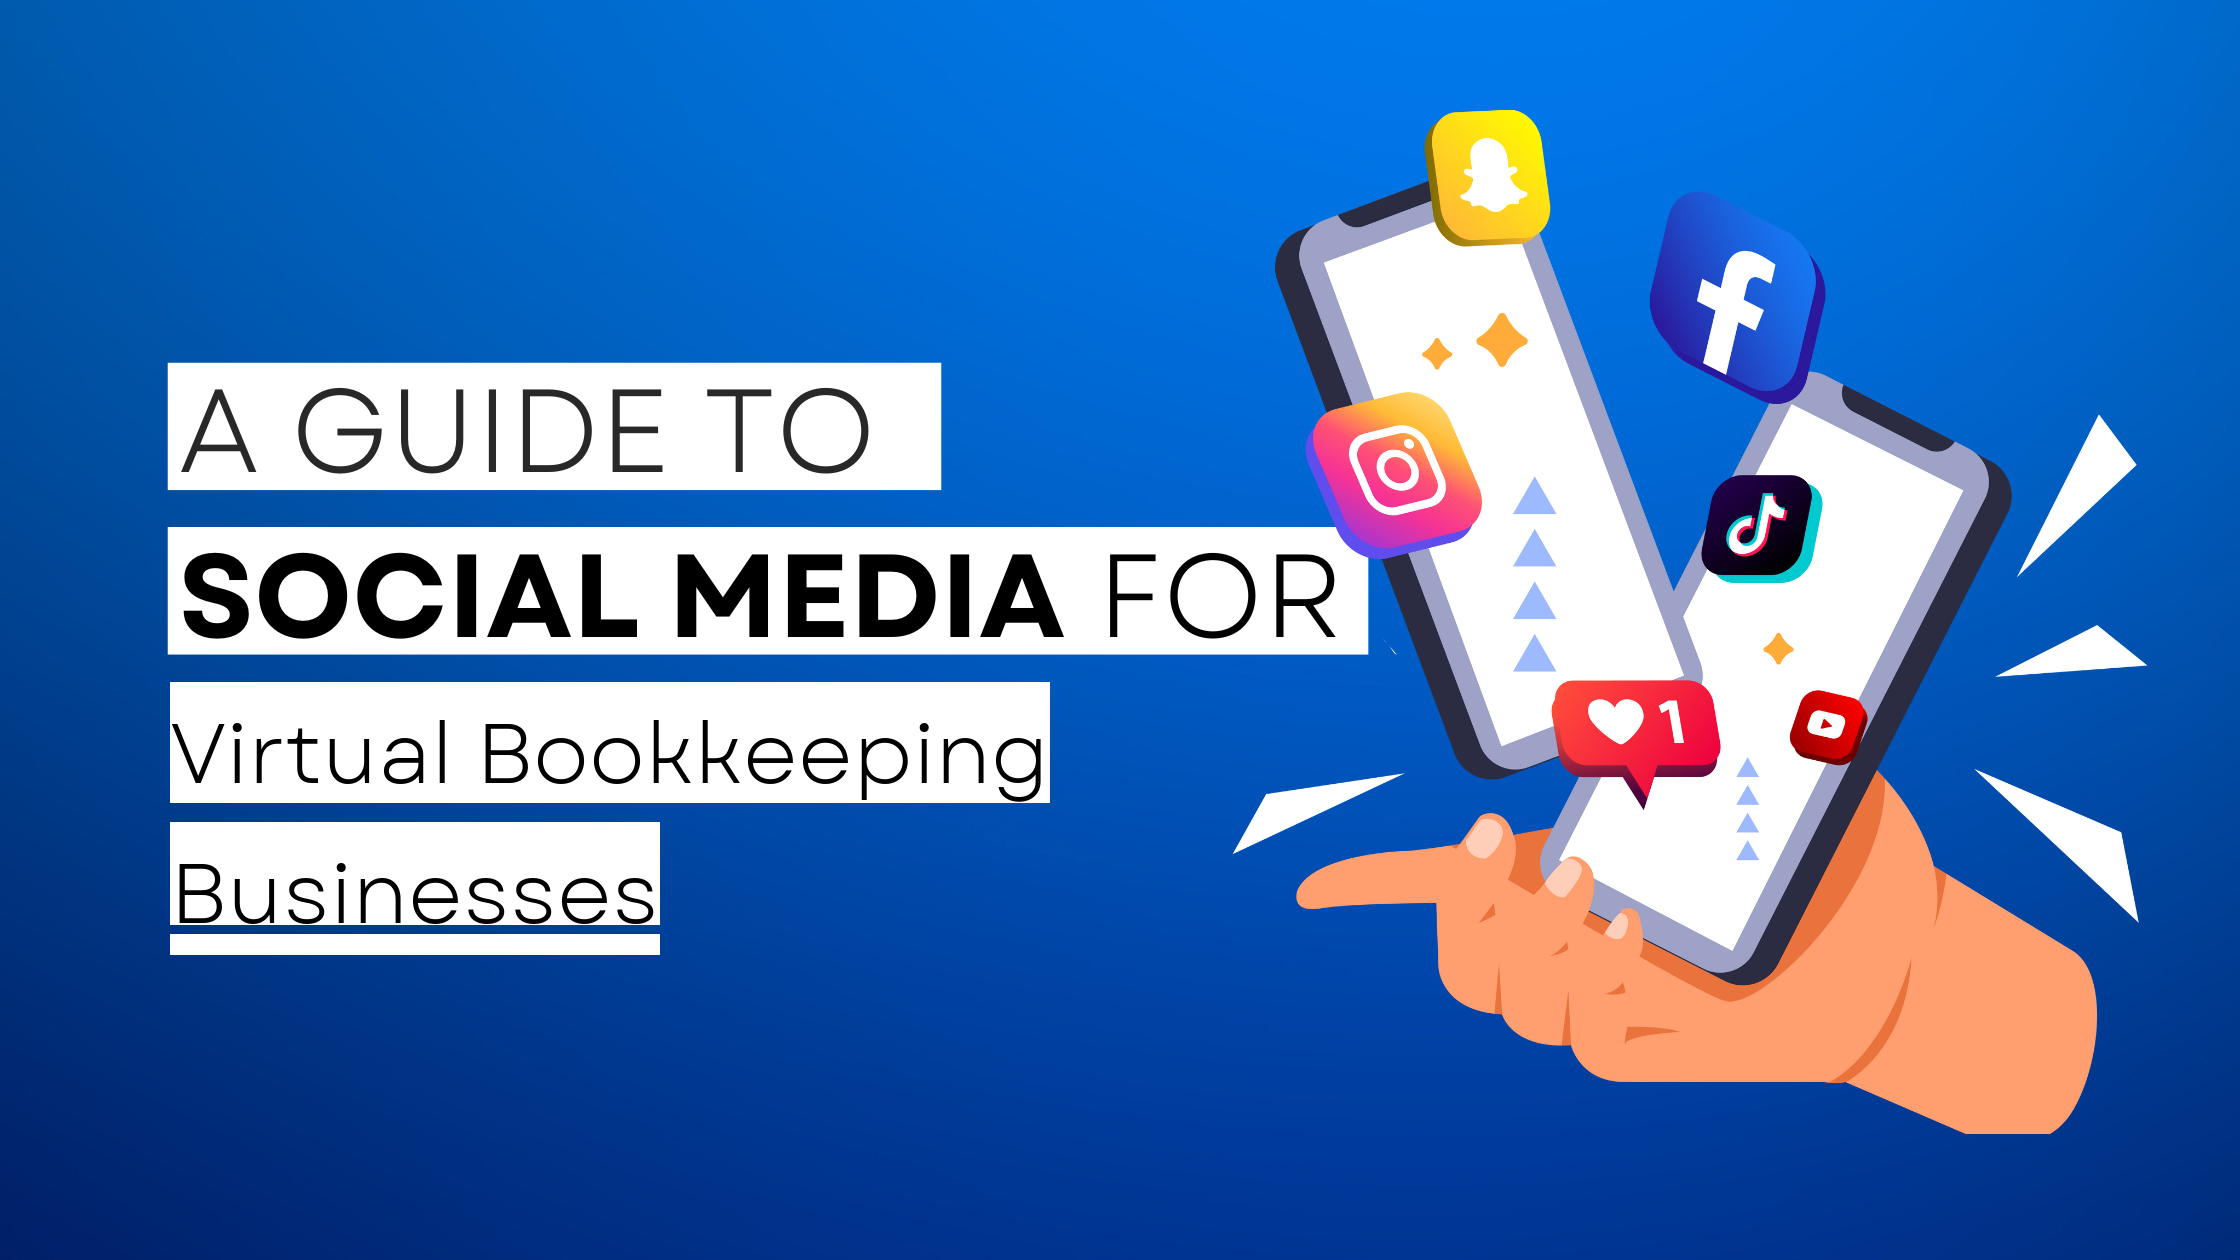 How to start Virtual Bookkeeping on social media